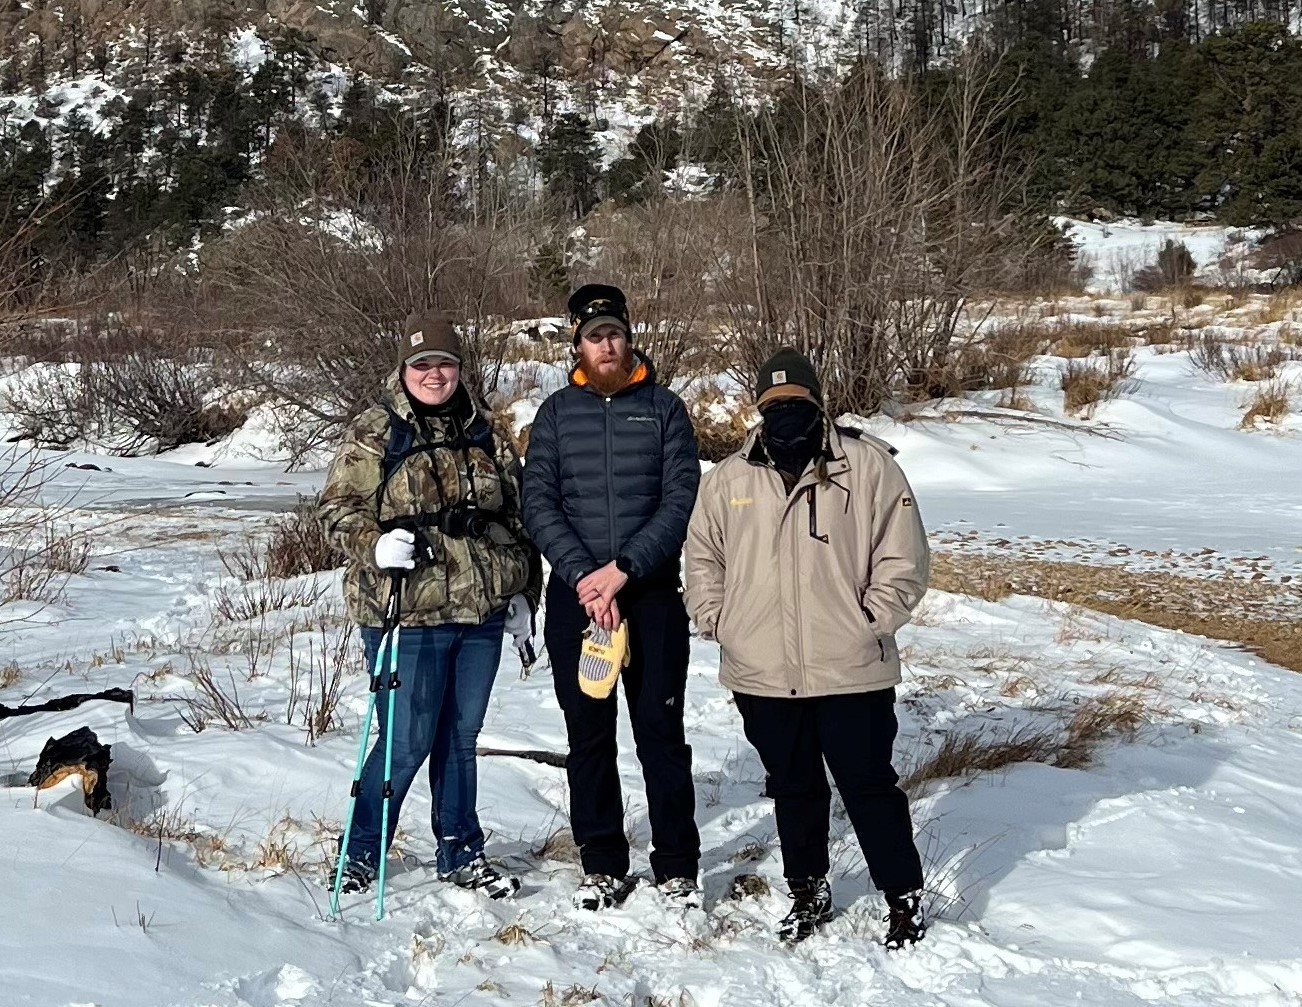 FHSU online students Mary Kate Hale and Brooklyn Whitcomb with assistant professor Matthew Clay in Rocky Mountain National Park